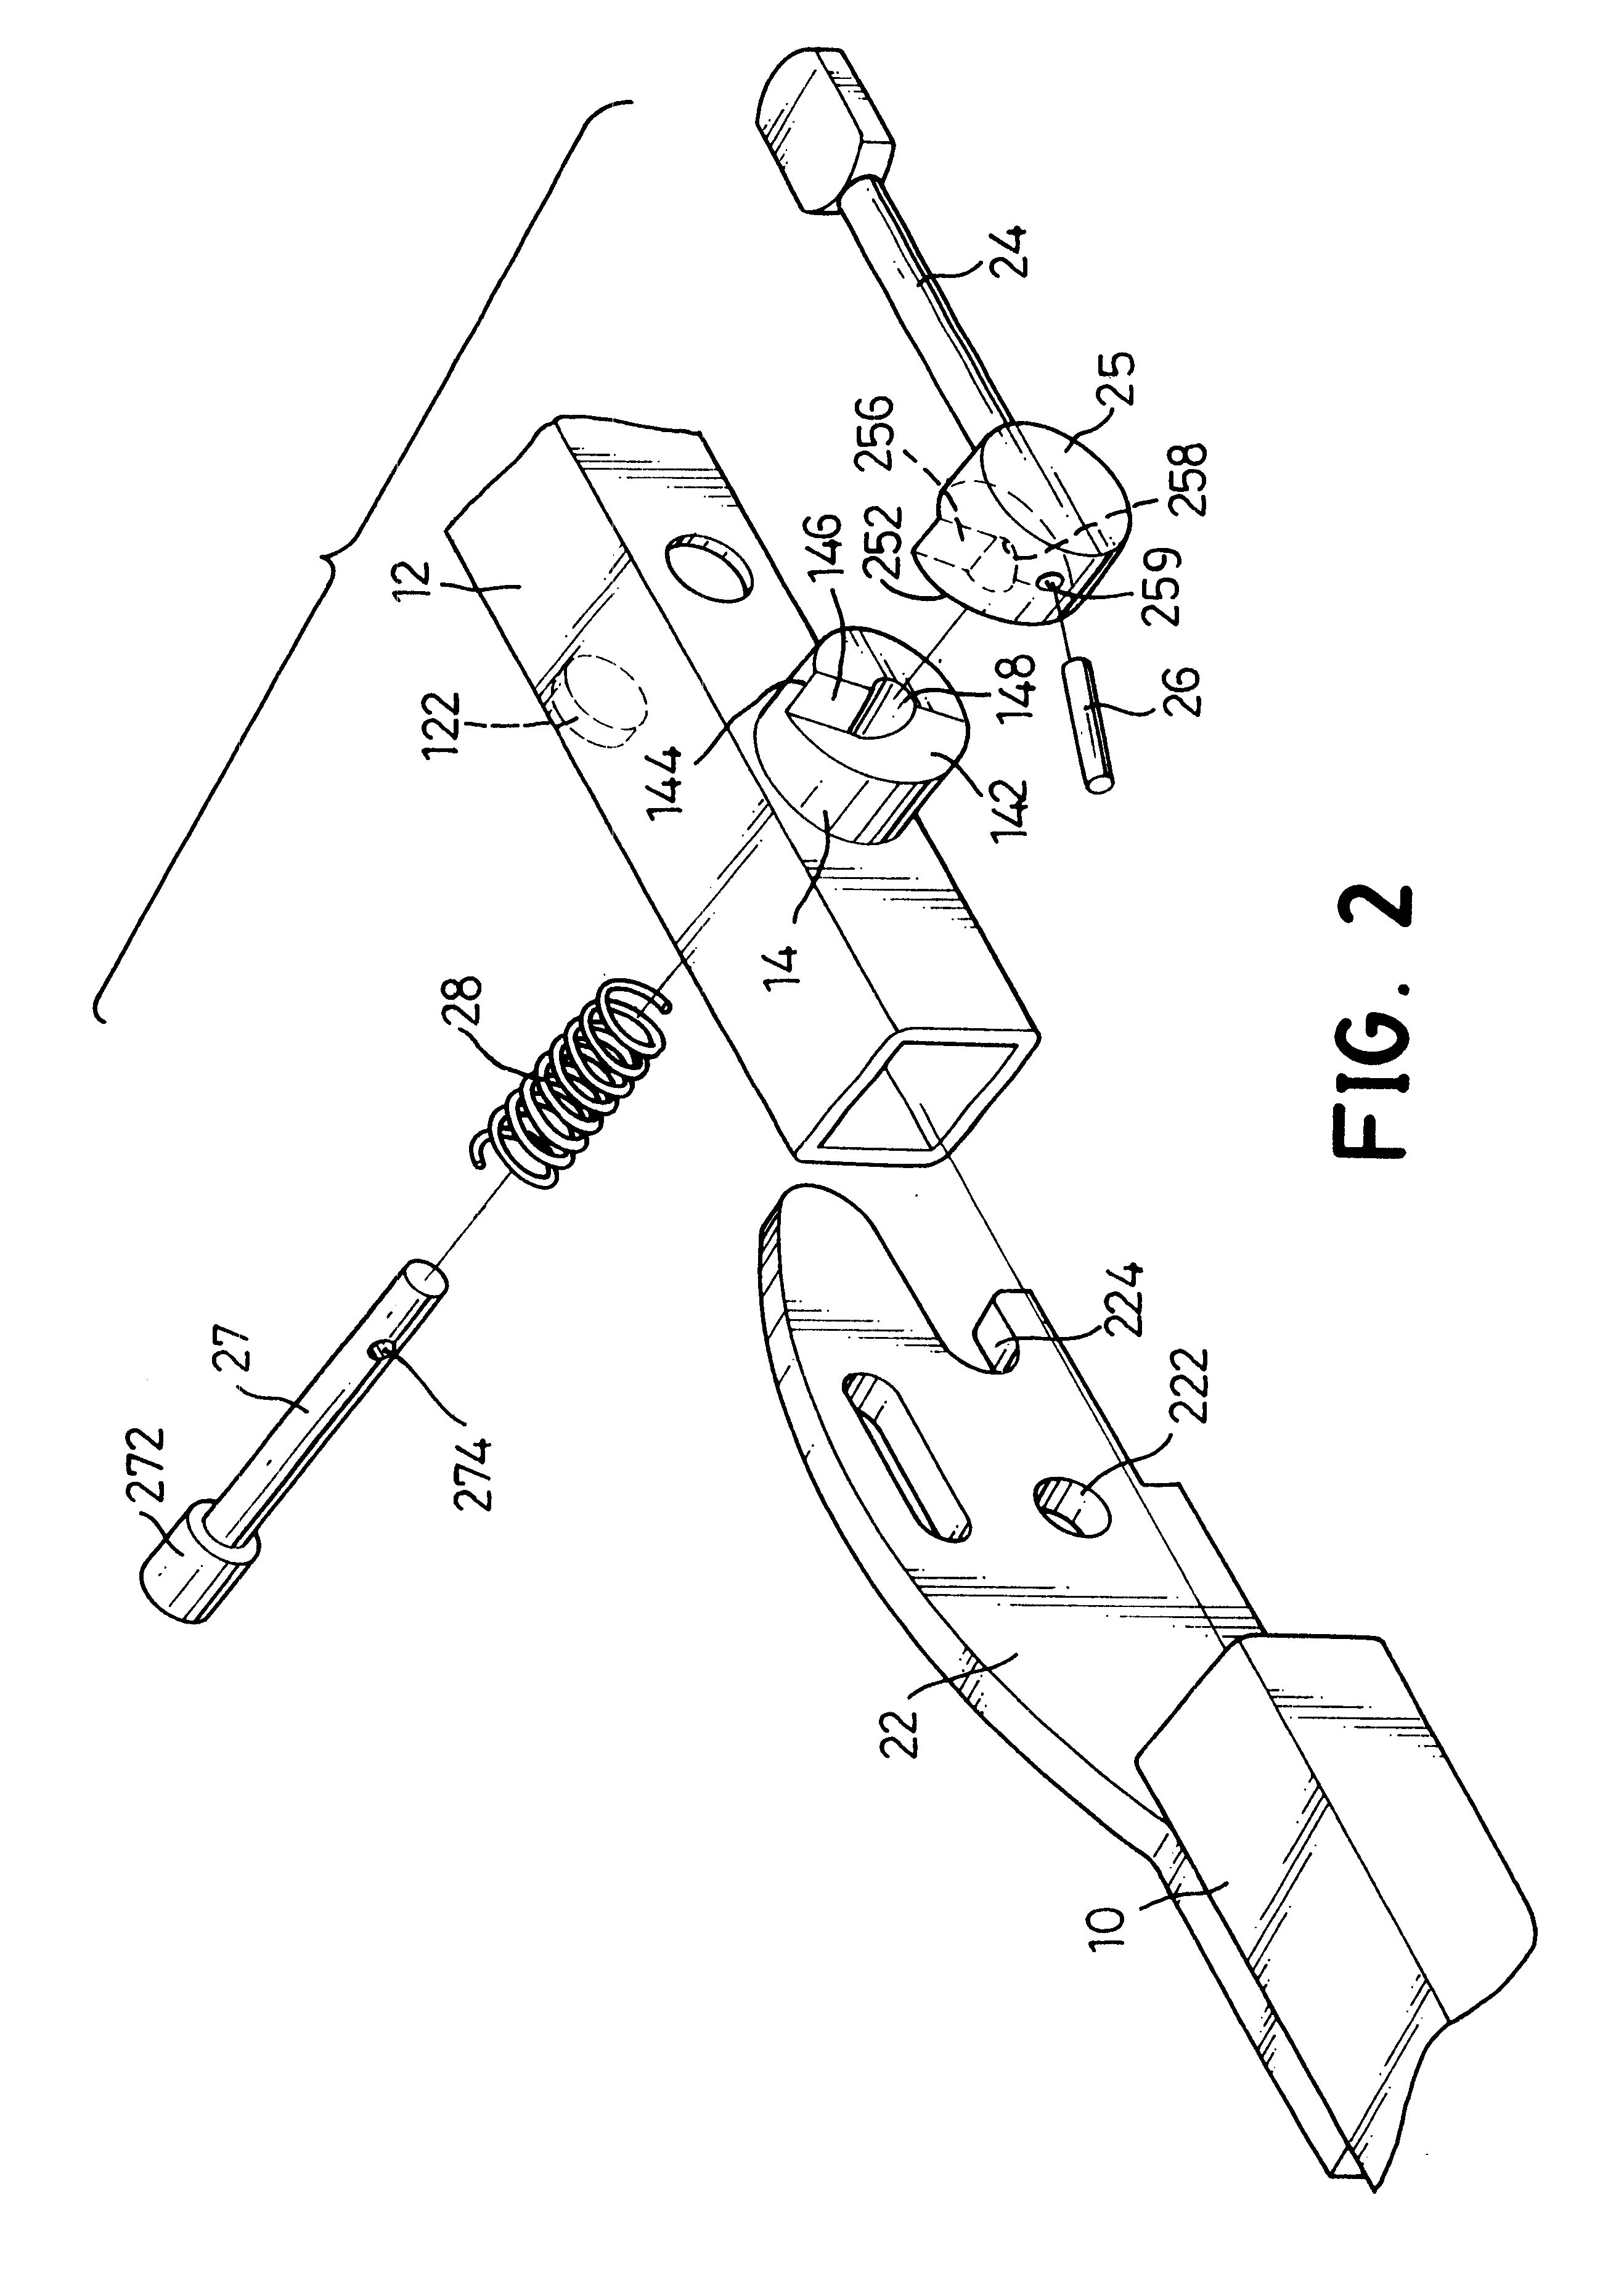 Separable frame for an electric scooter